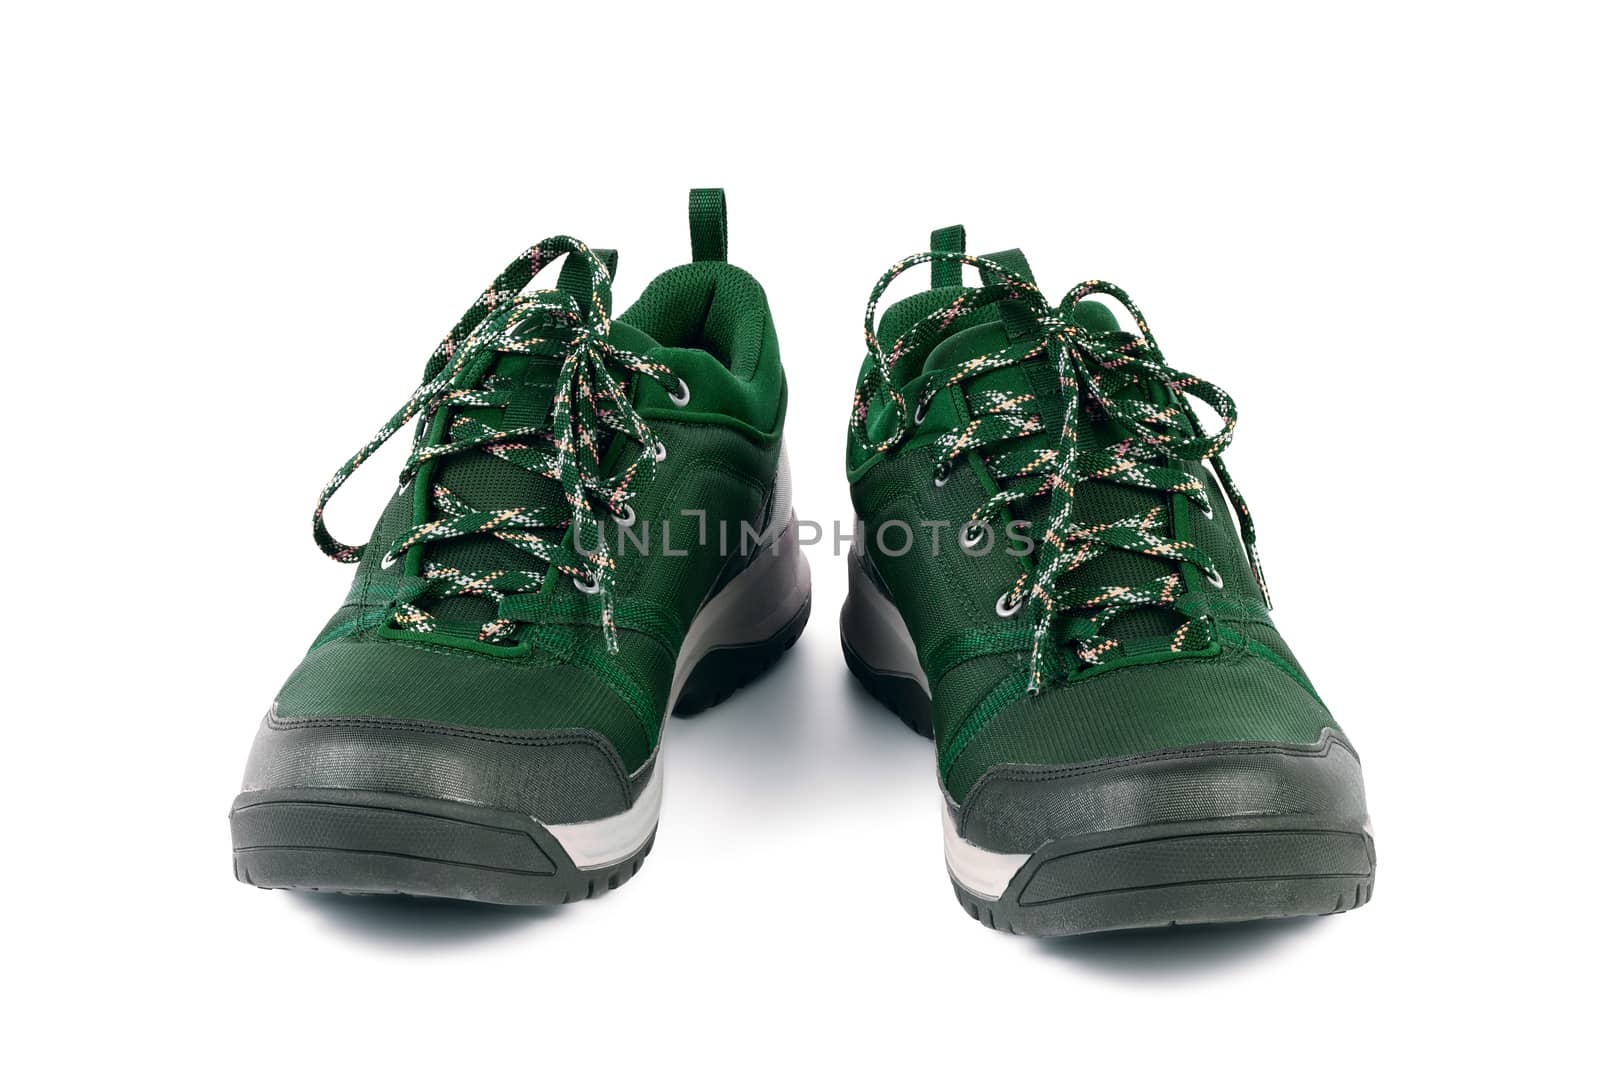 black and green outdoor empty lightweight waterproof breathable fabric sneakers isolated on white background.